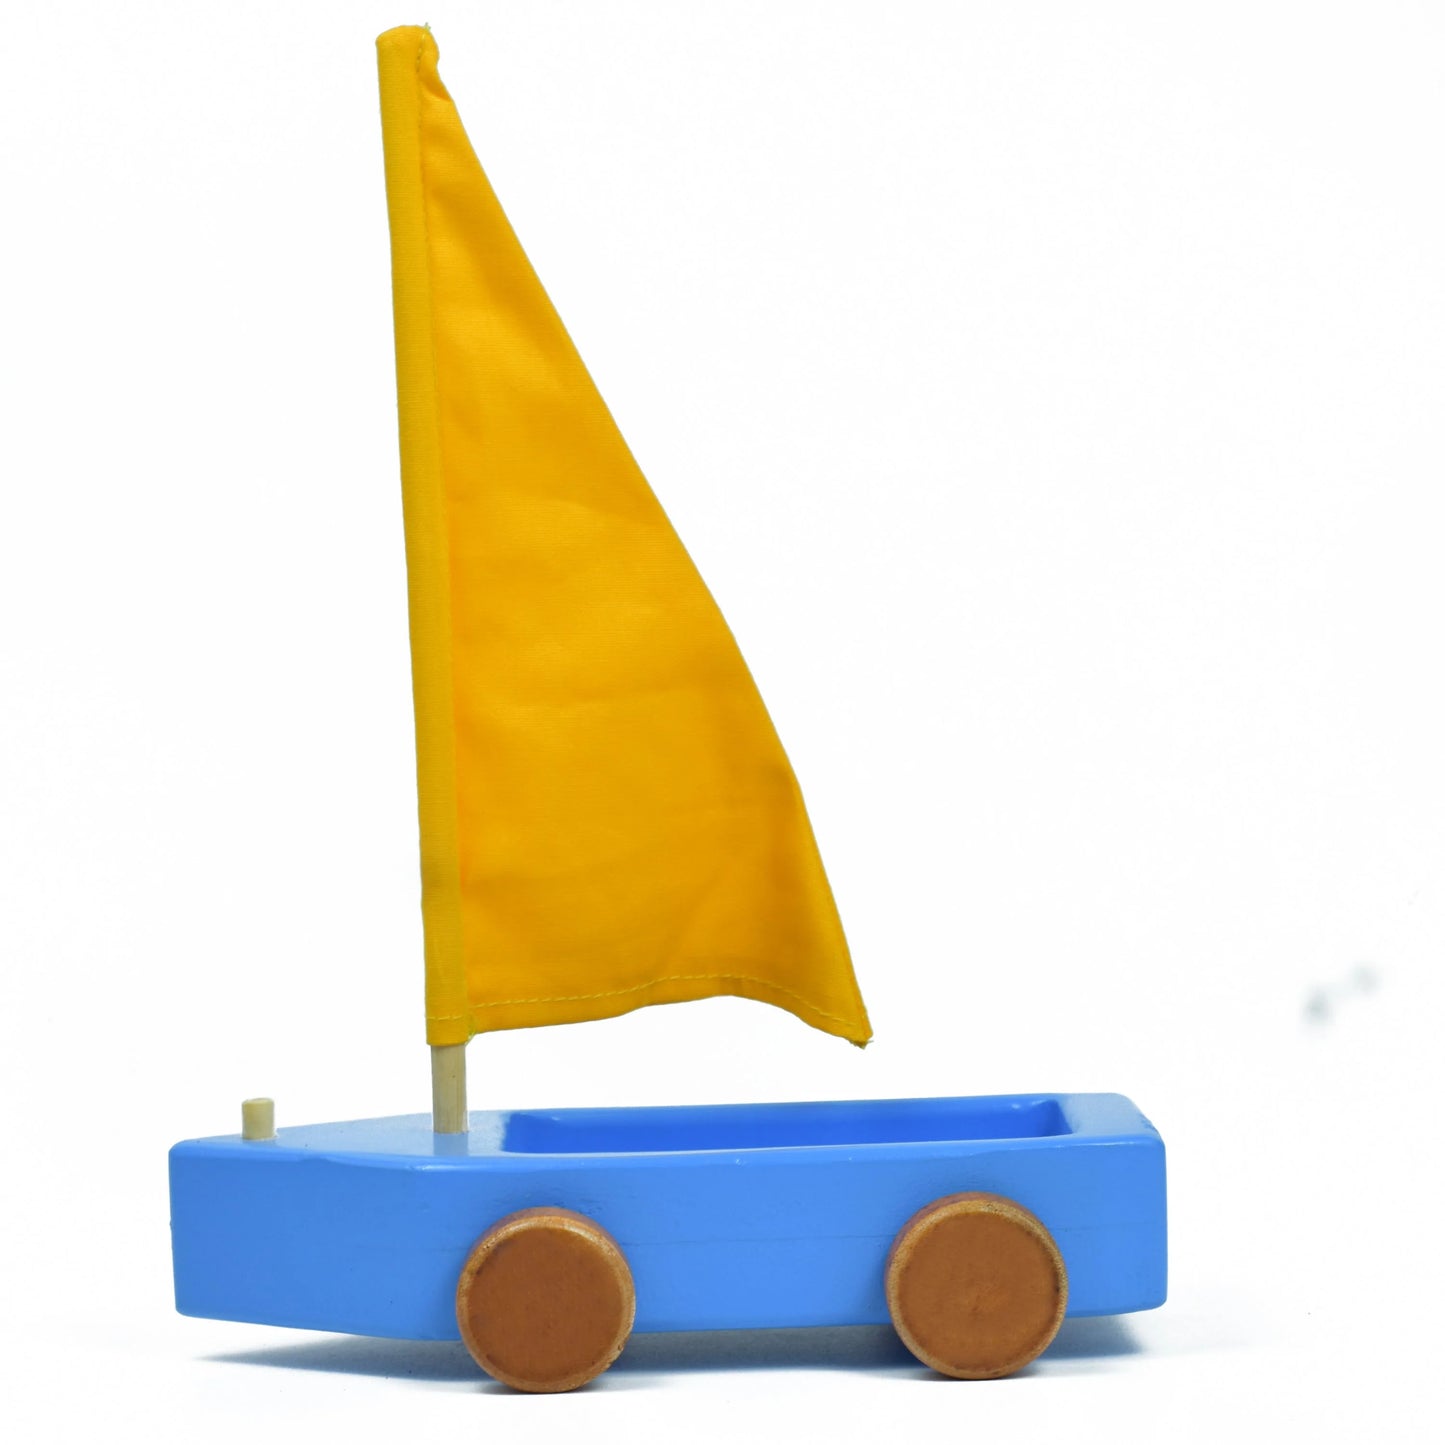 Buy Wooden Boat Play Toy - SkilloToys.com